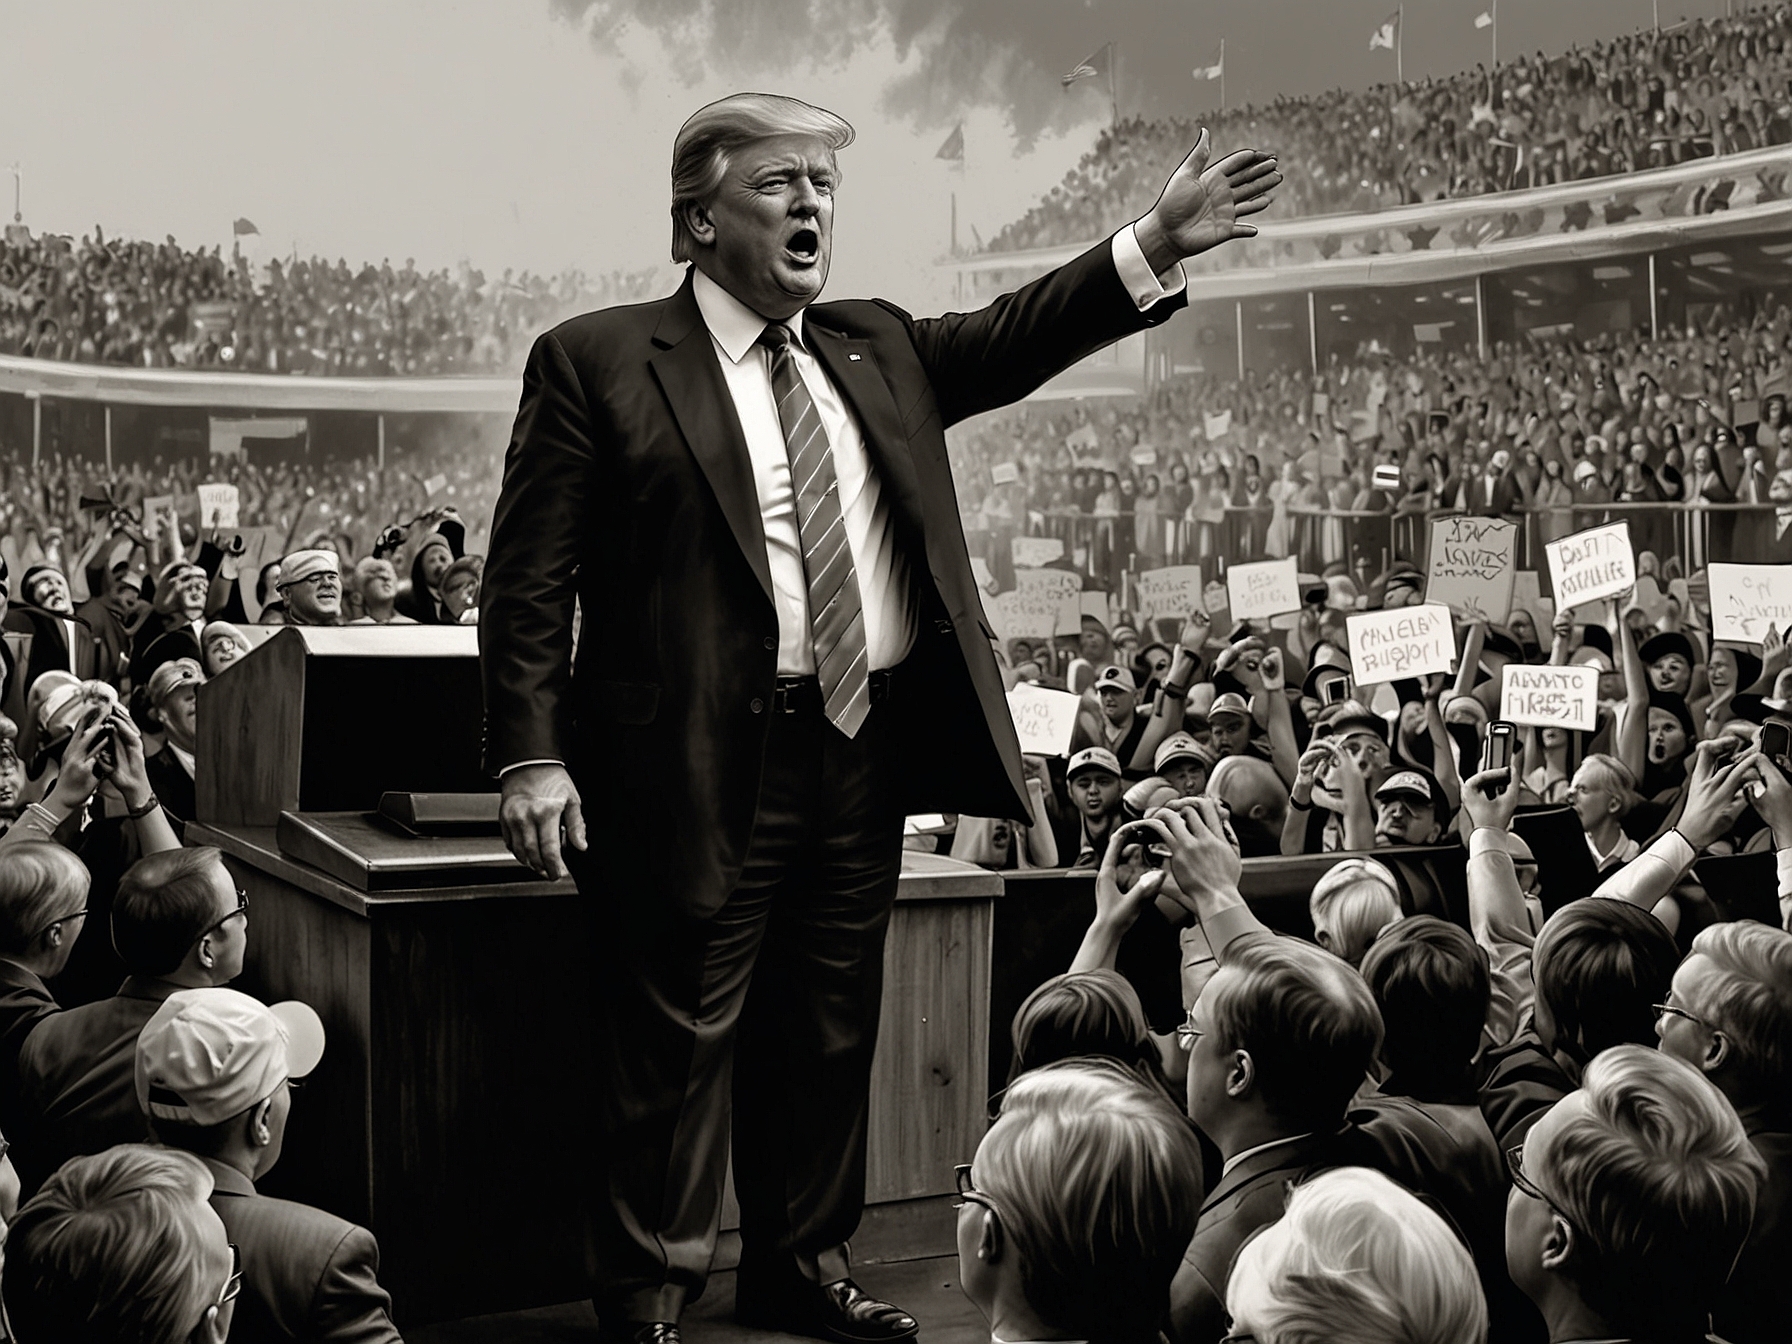 Former President Donald Trump addresses supporters at a high-energy rally, a key element in his recent successful fundraising efforts, showcasing large enthusiastic crowds and strong media presence.